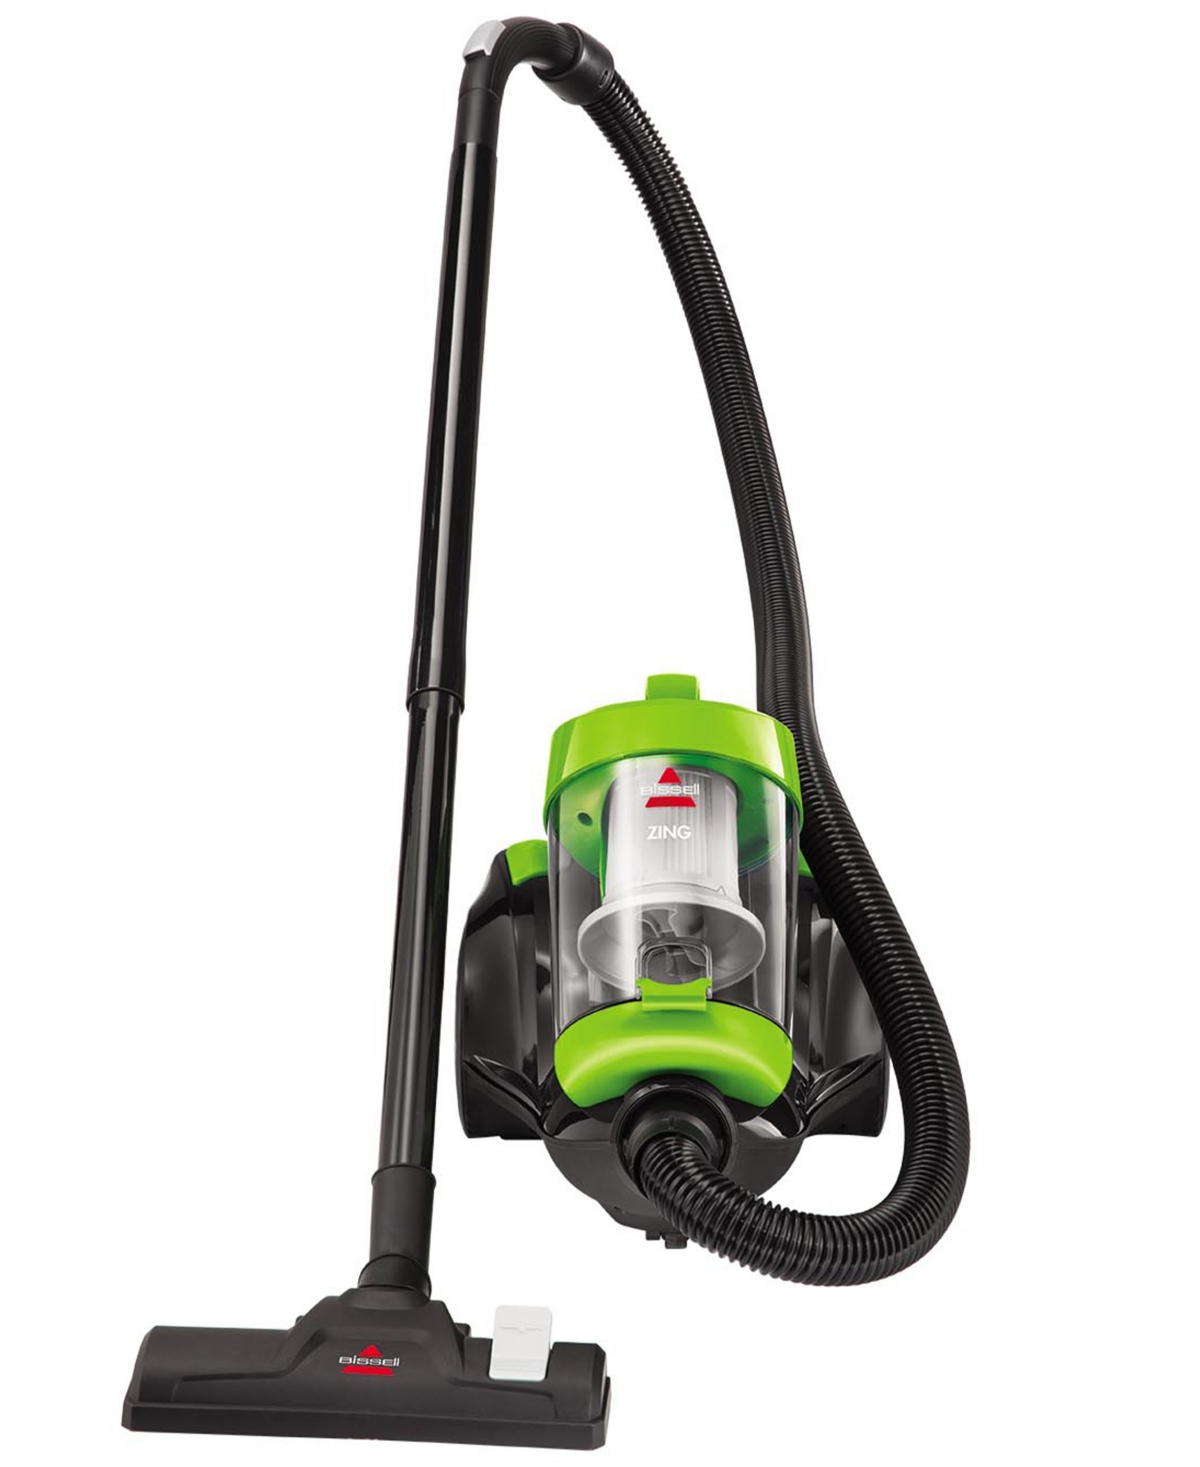 Zing Bagless Canister Vacuum - Black